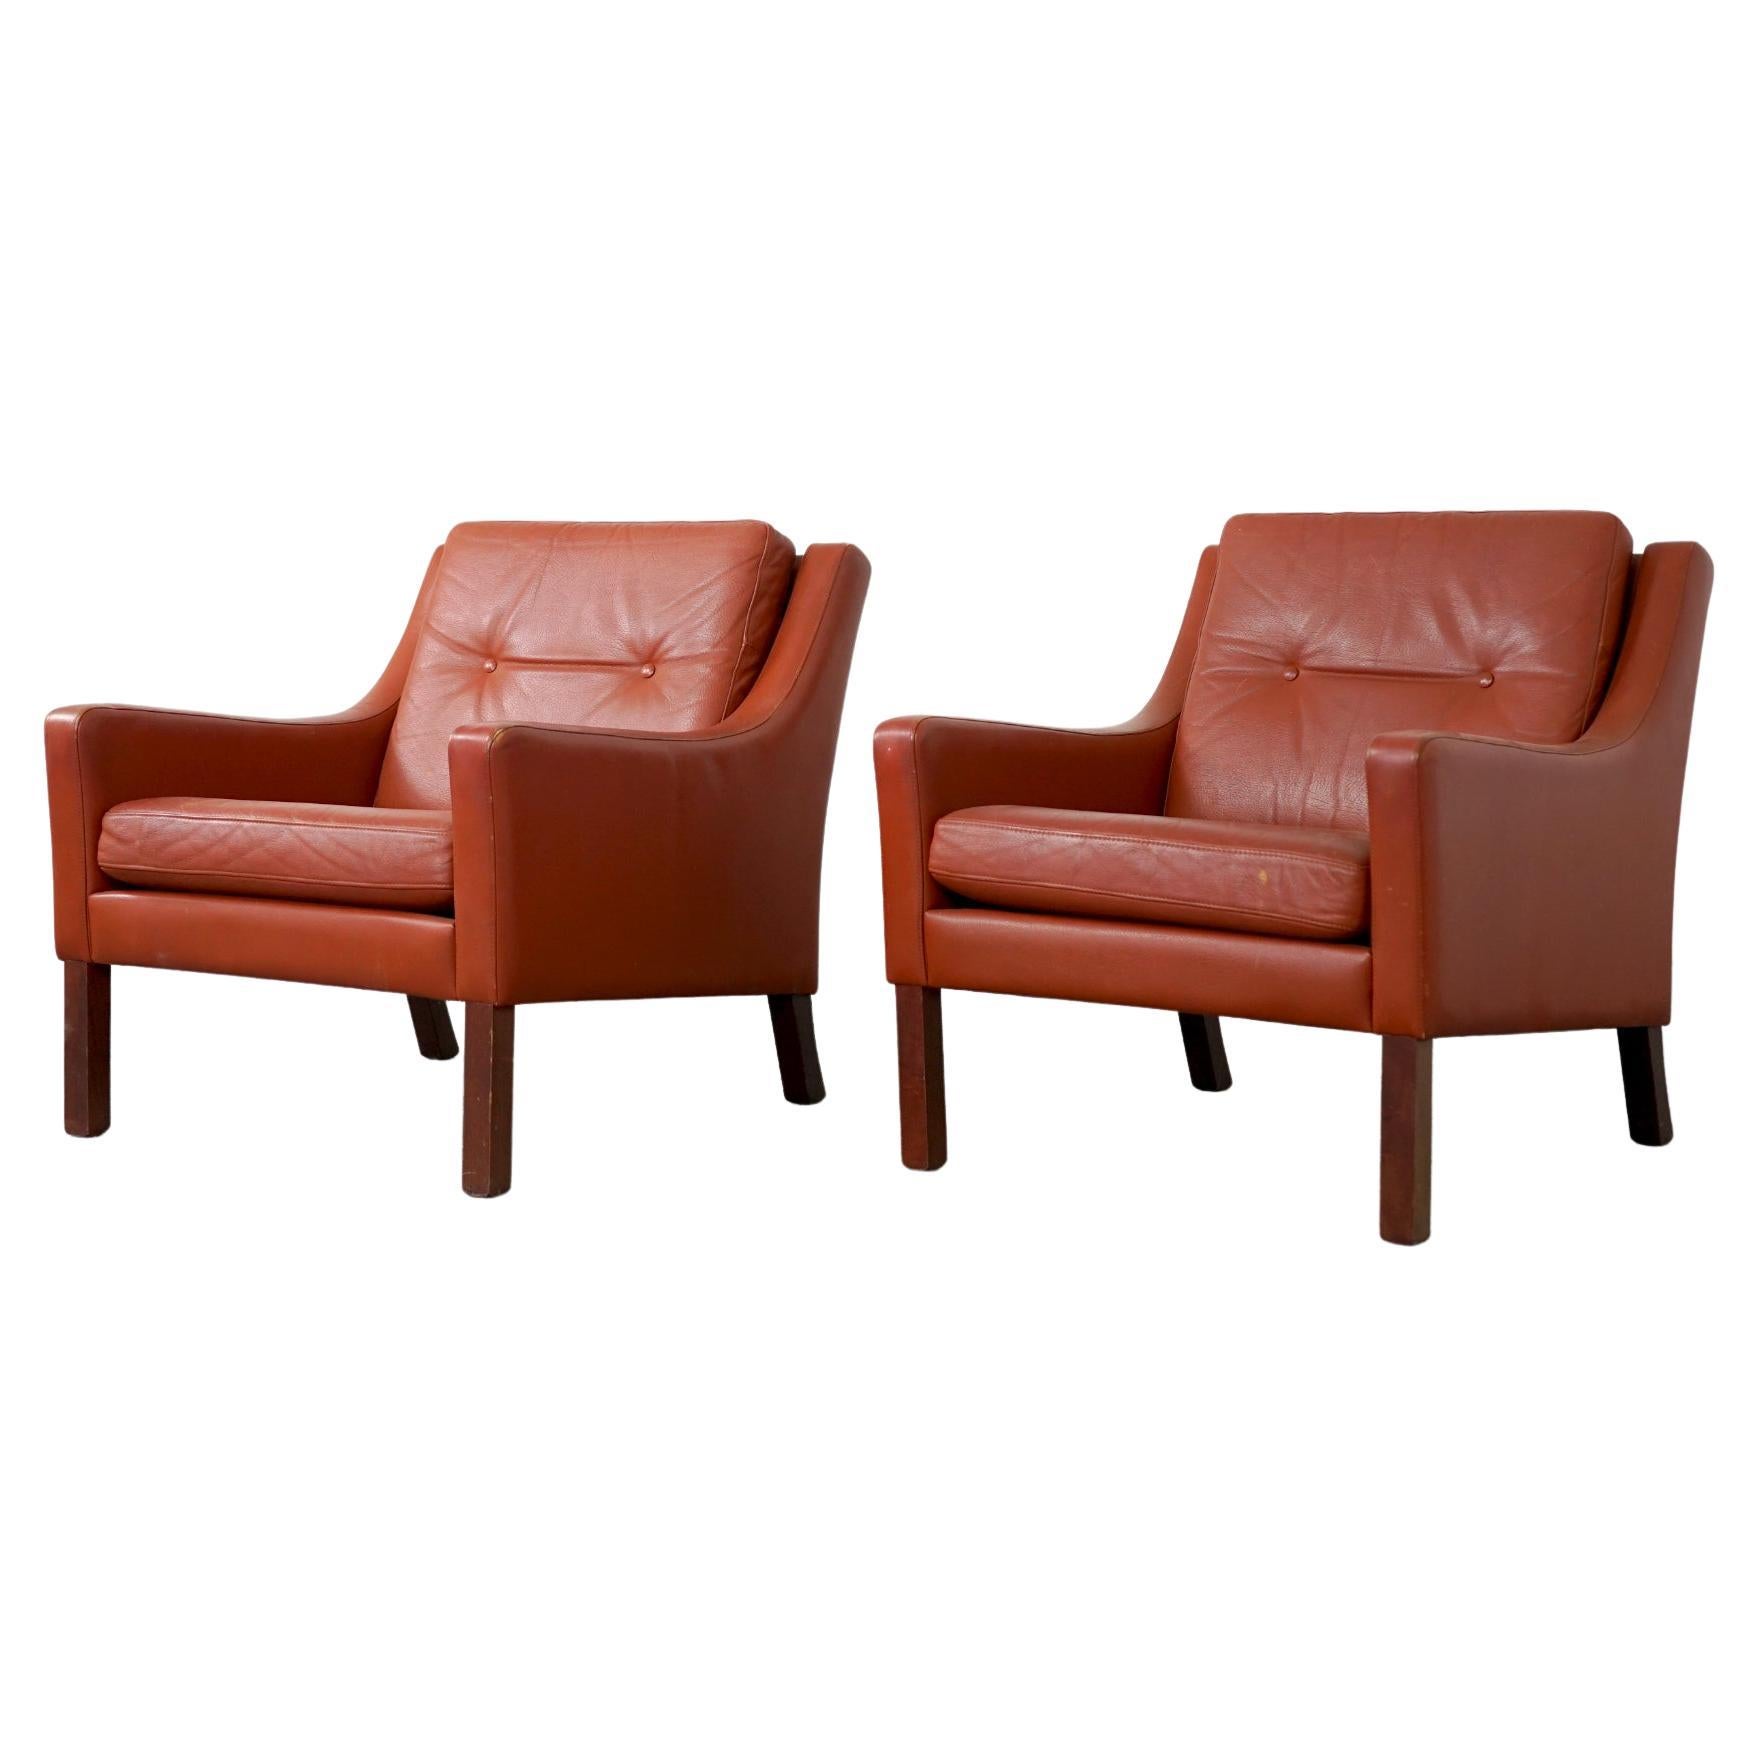 Pair of Danish Mid-Century Modern Tufted Leather Loungers For Sale